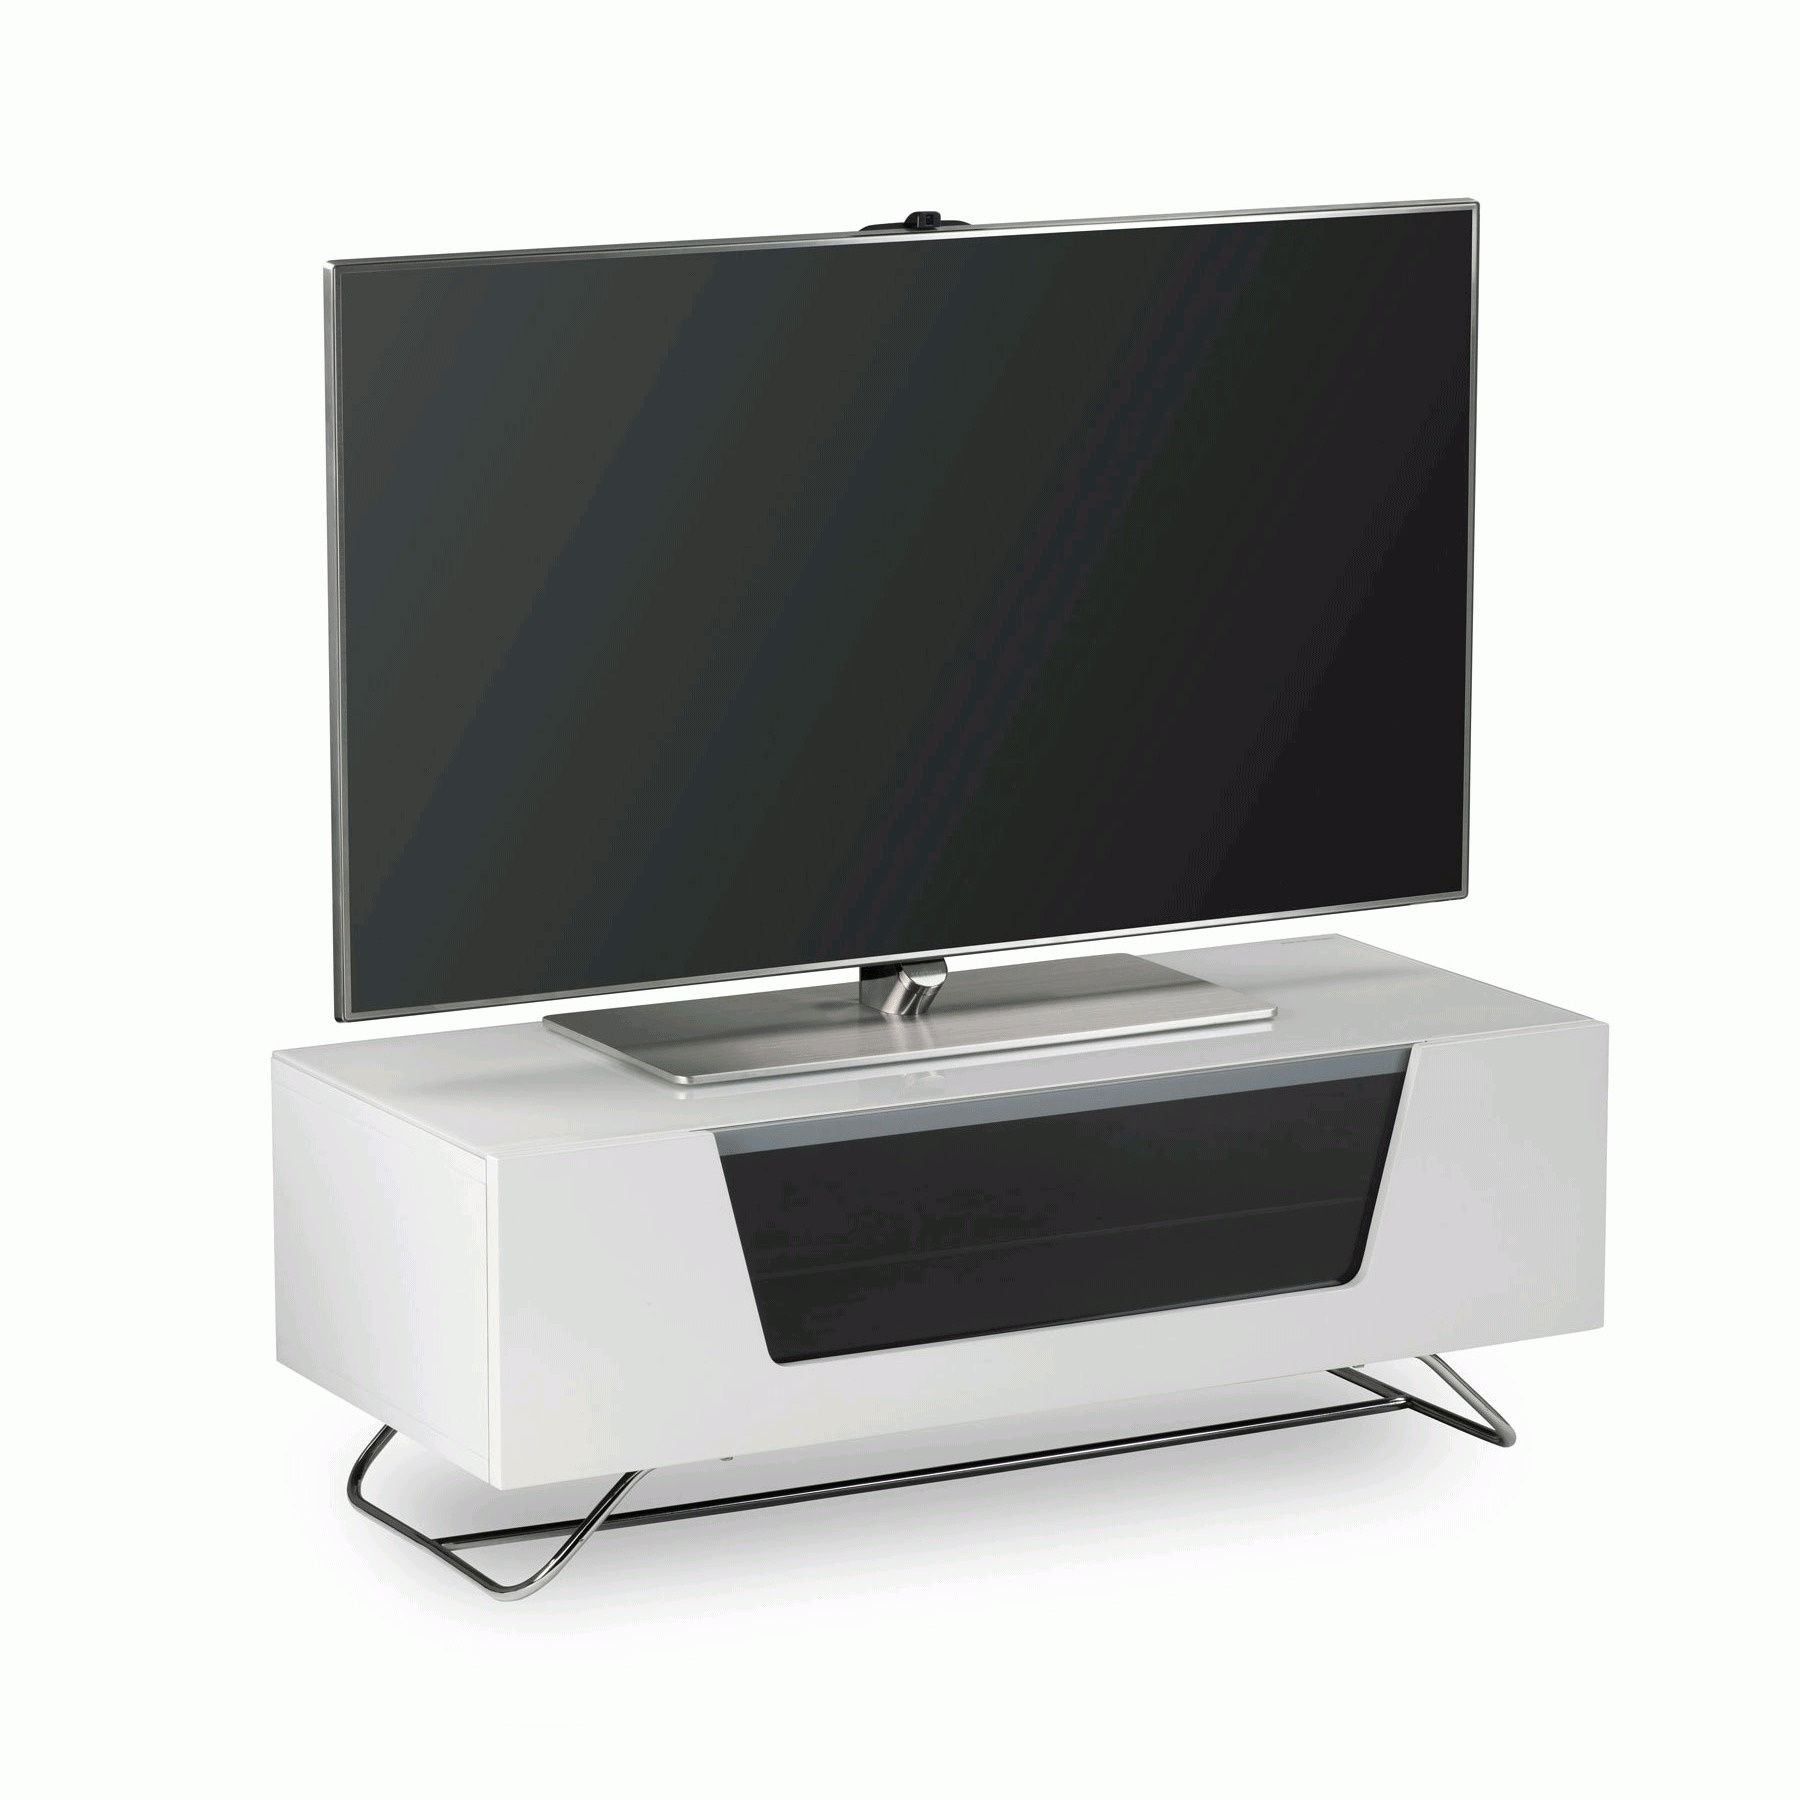 Alphason Chromium 2 100cm White Tv Stand For Up To 50" Tvs In Tv Unit 100cm (View 7 of 15)